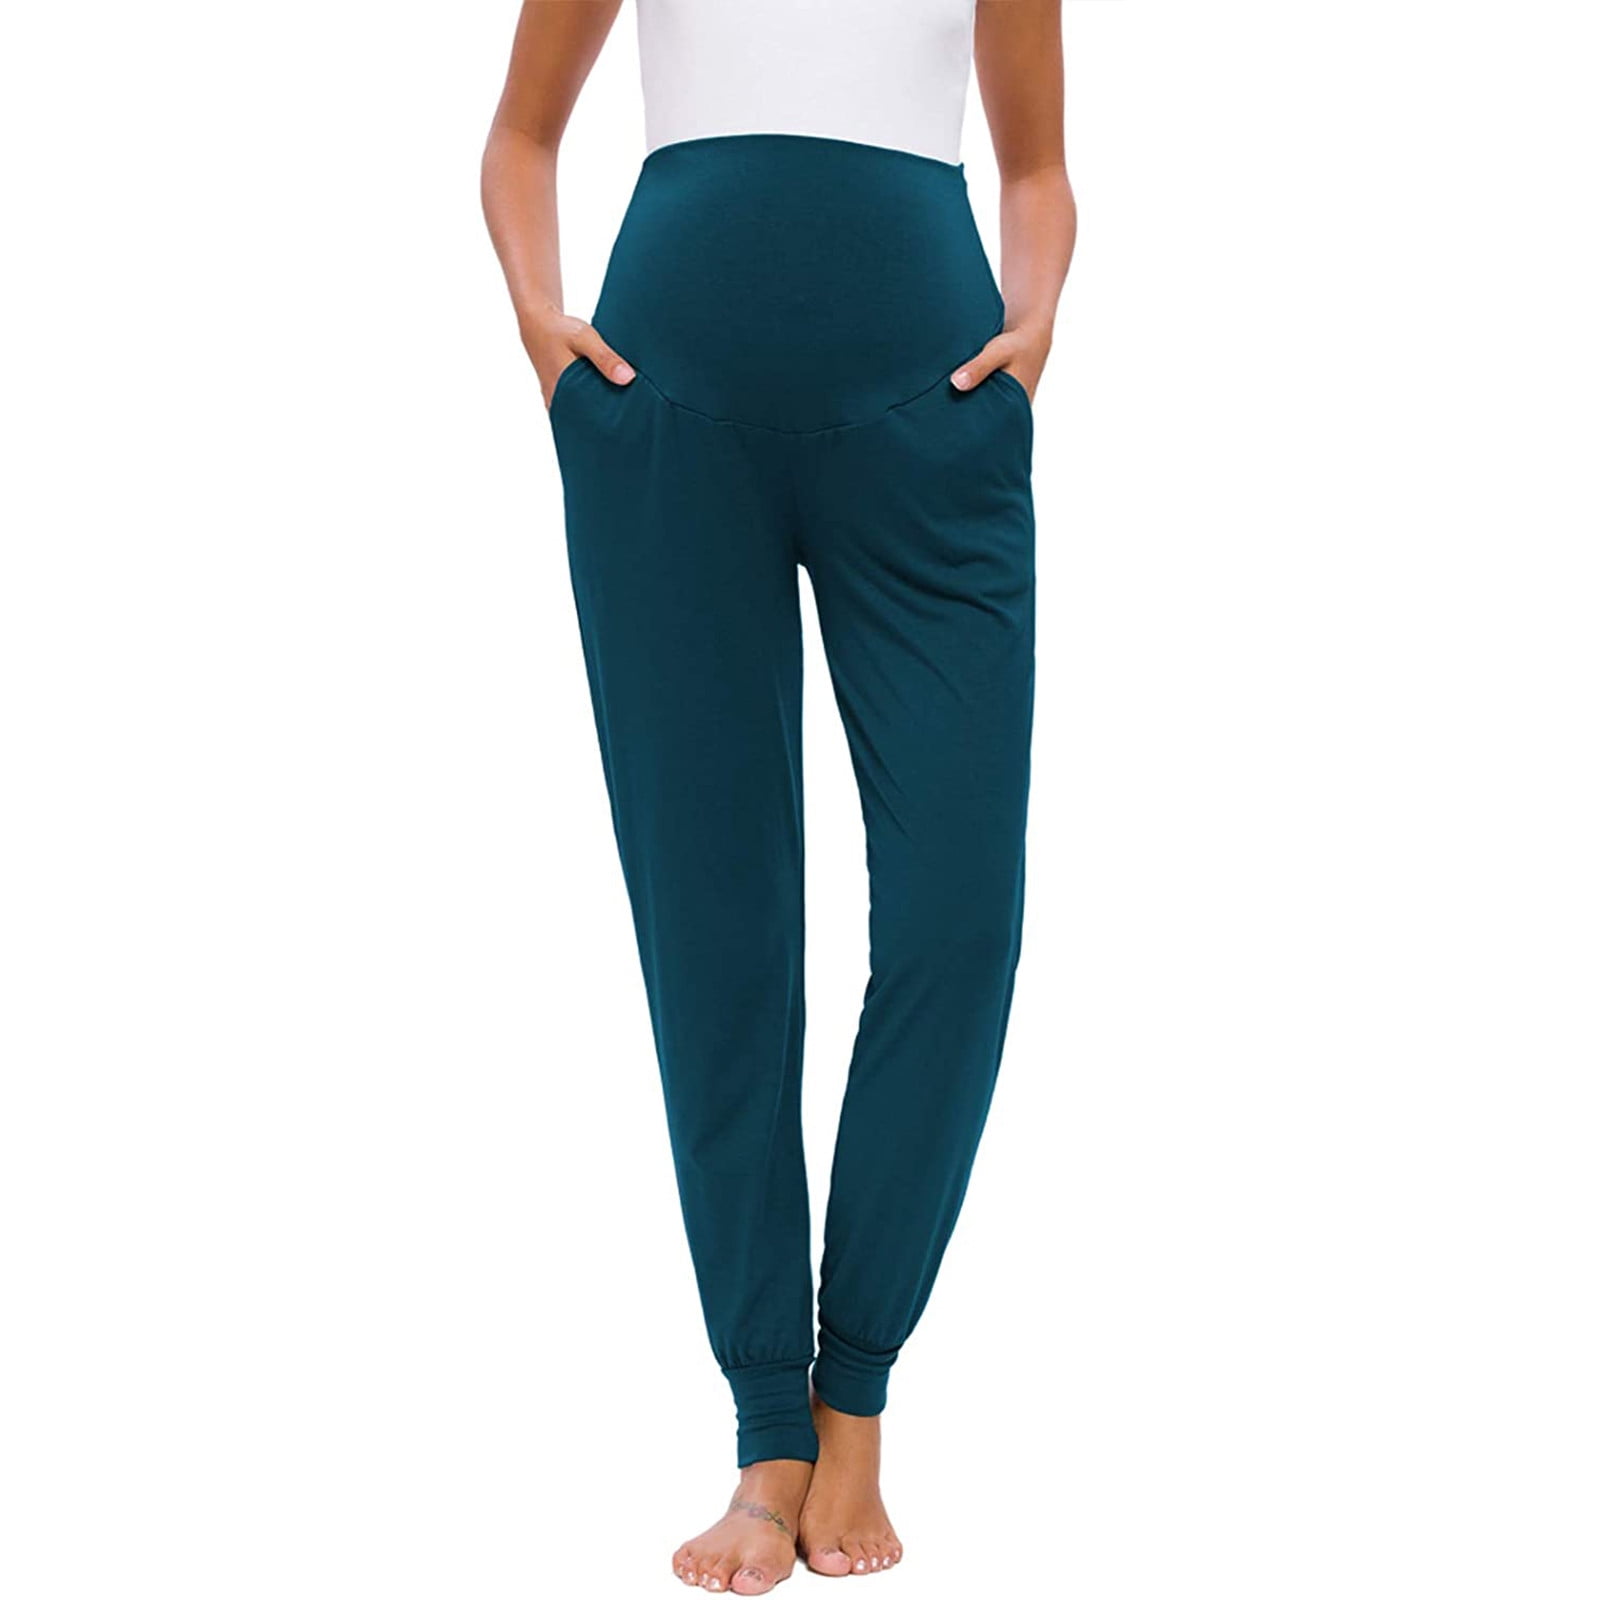 Over The Belly Pregnancy Yoga Pants with Pockets Soft Activewear